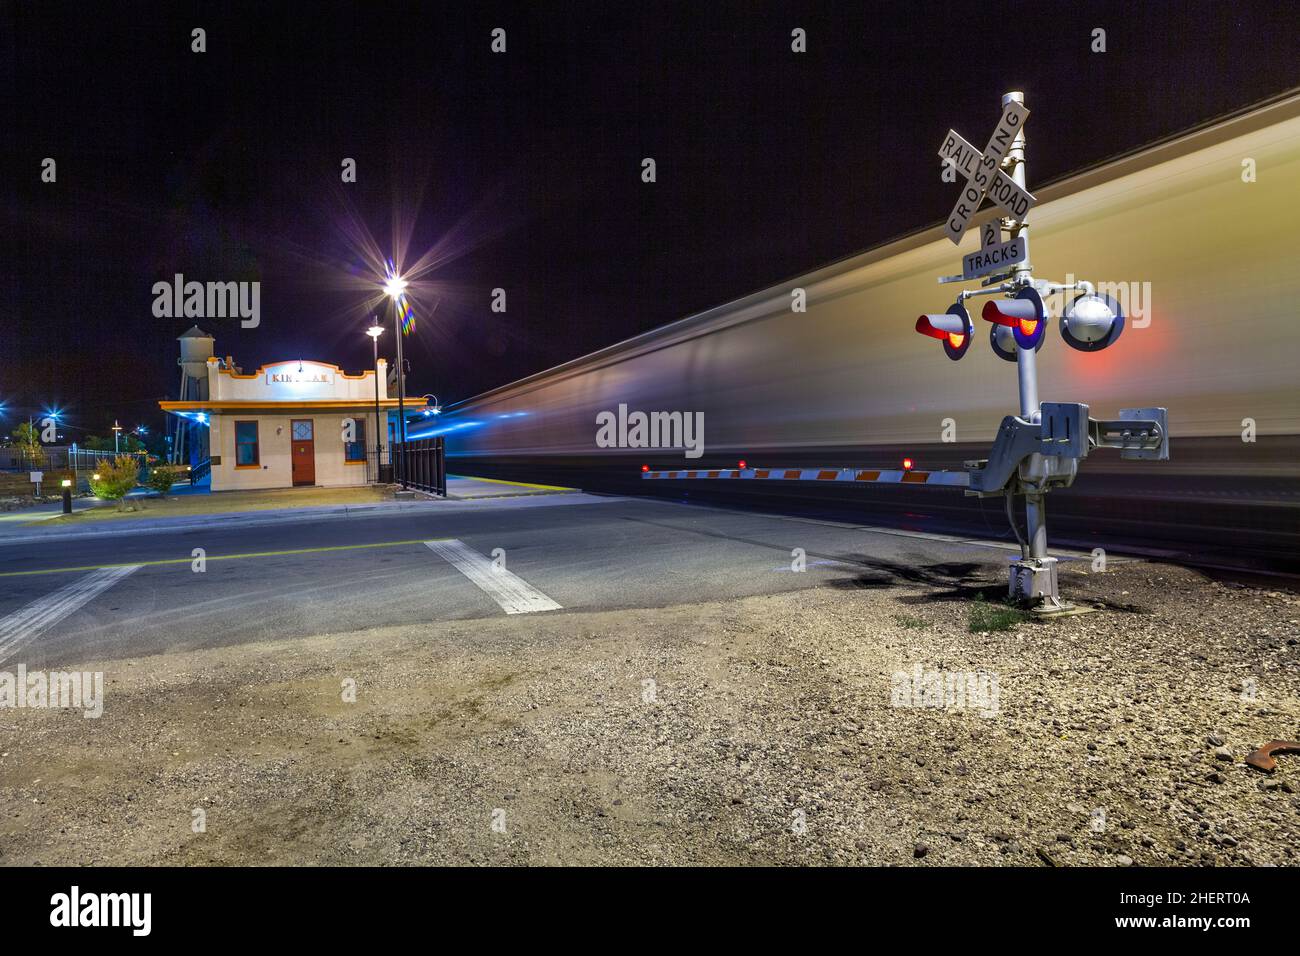 Railroad crossing with passing train by night at route 66 Stock Photo